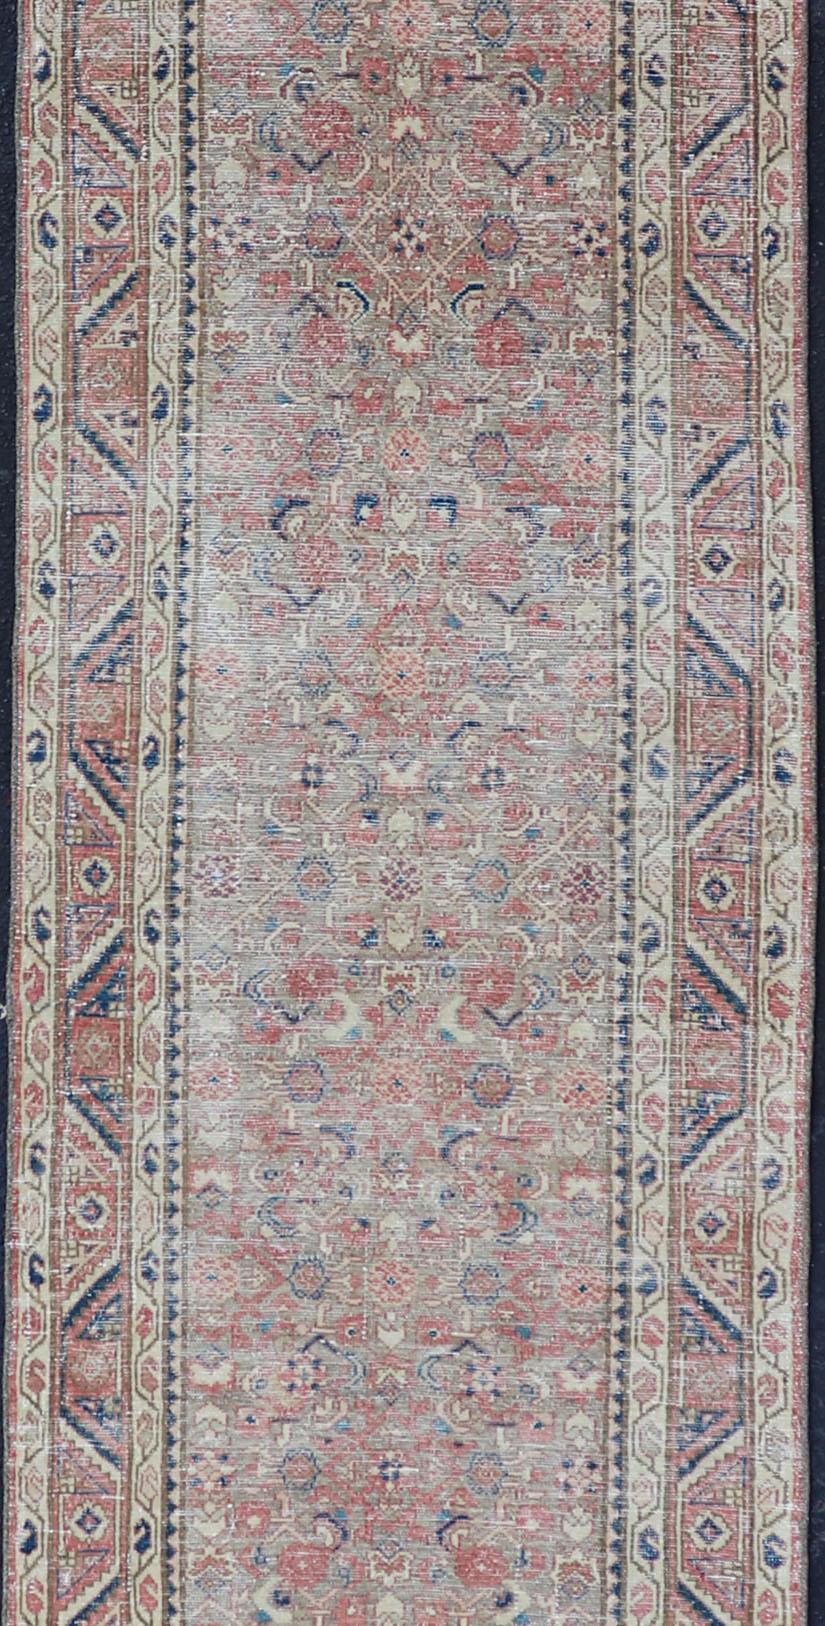 Long Persian Malayer runner with small pattern in all-over design. Fine Persian Malayer Runner in soft tones of blue, salmon, cream, and earthy tones. Antique Persian rug with sub geometric and sub floral motifs. Keivan Woven Arts / rug